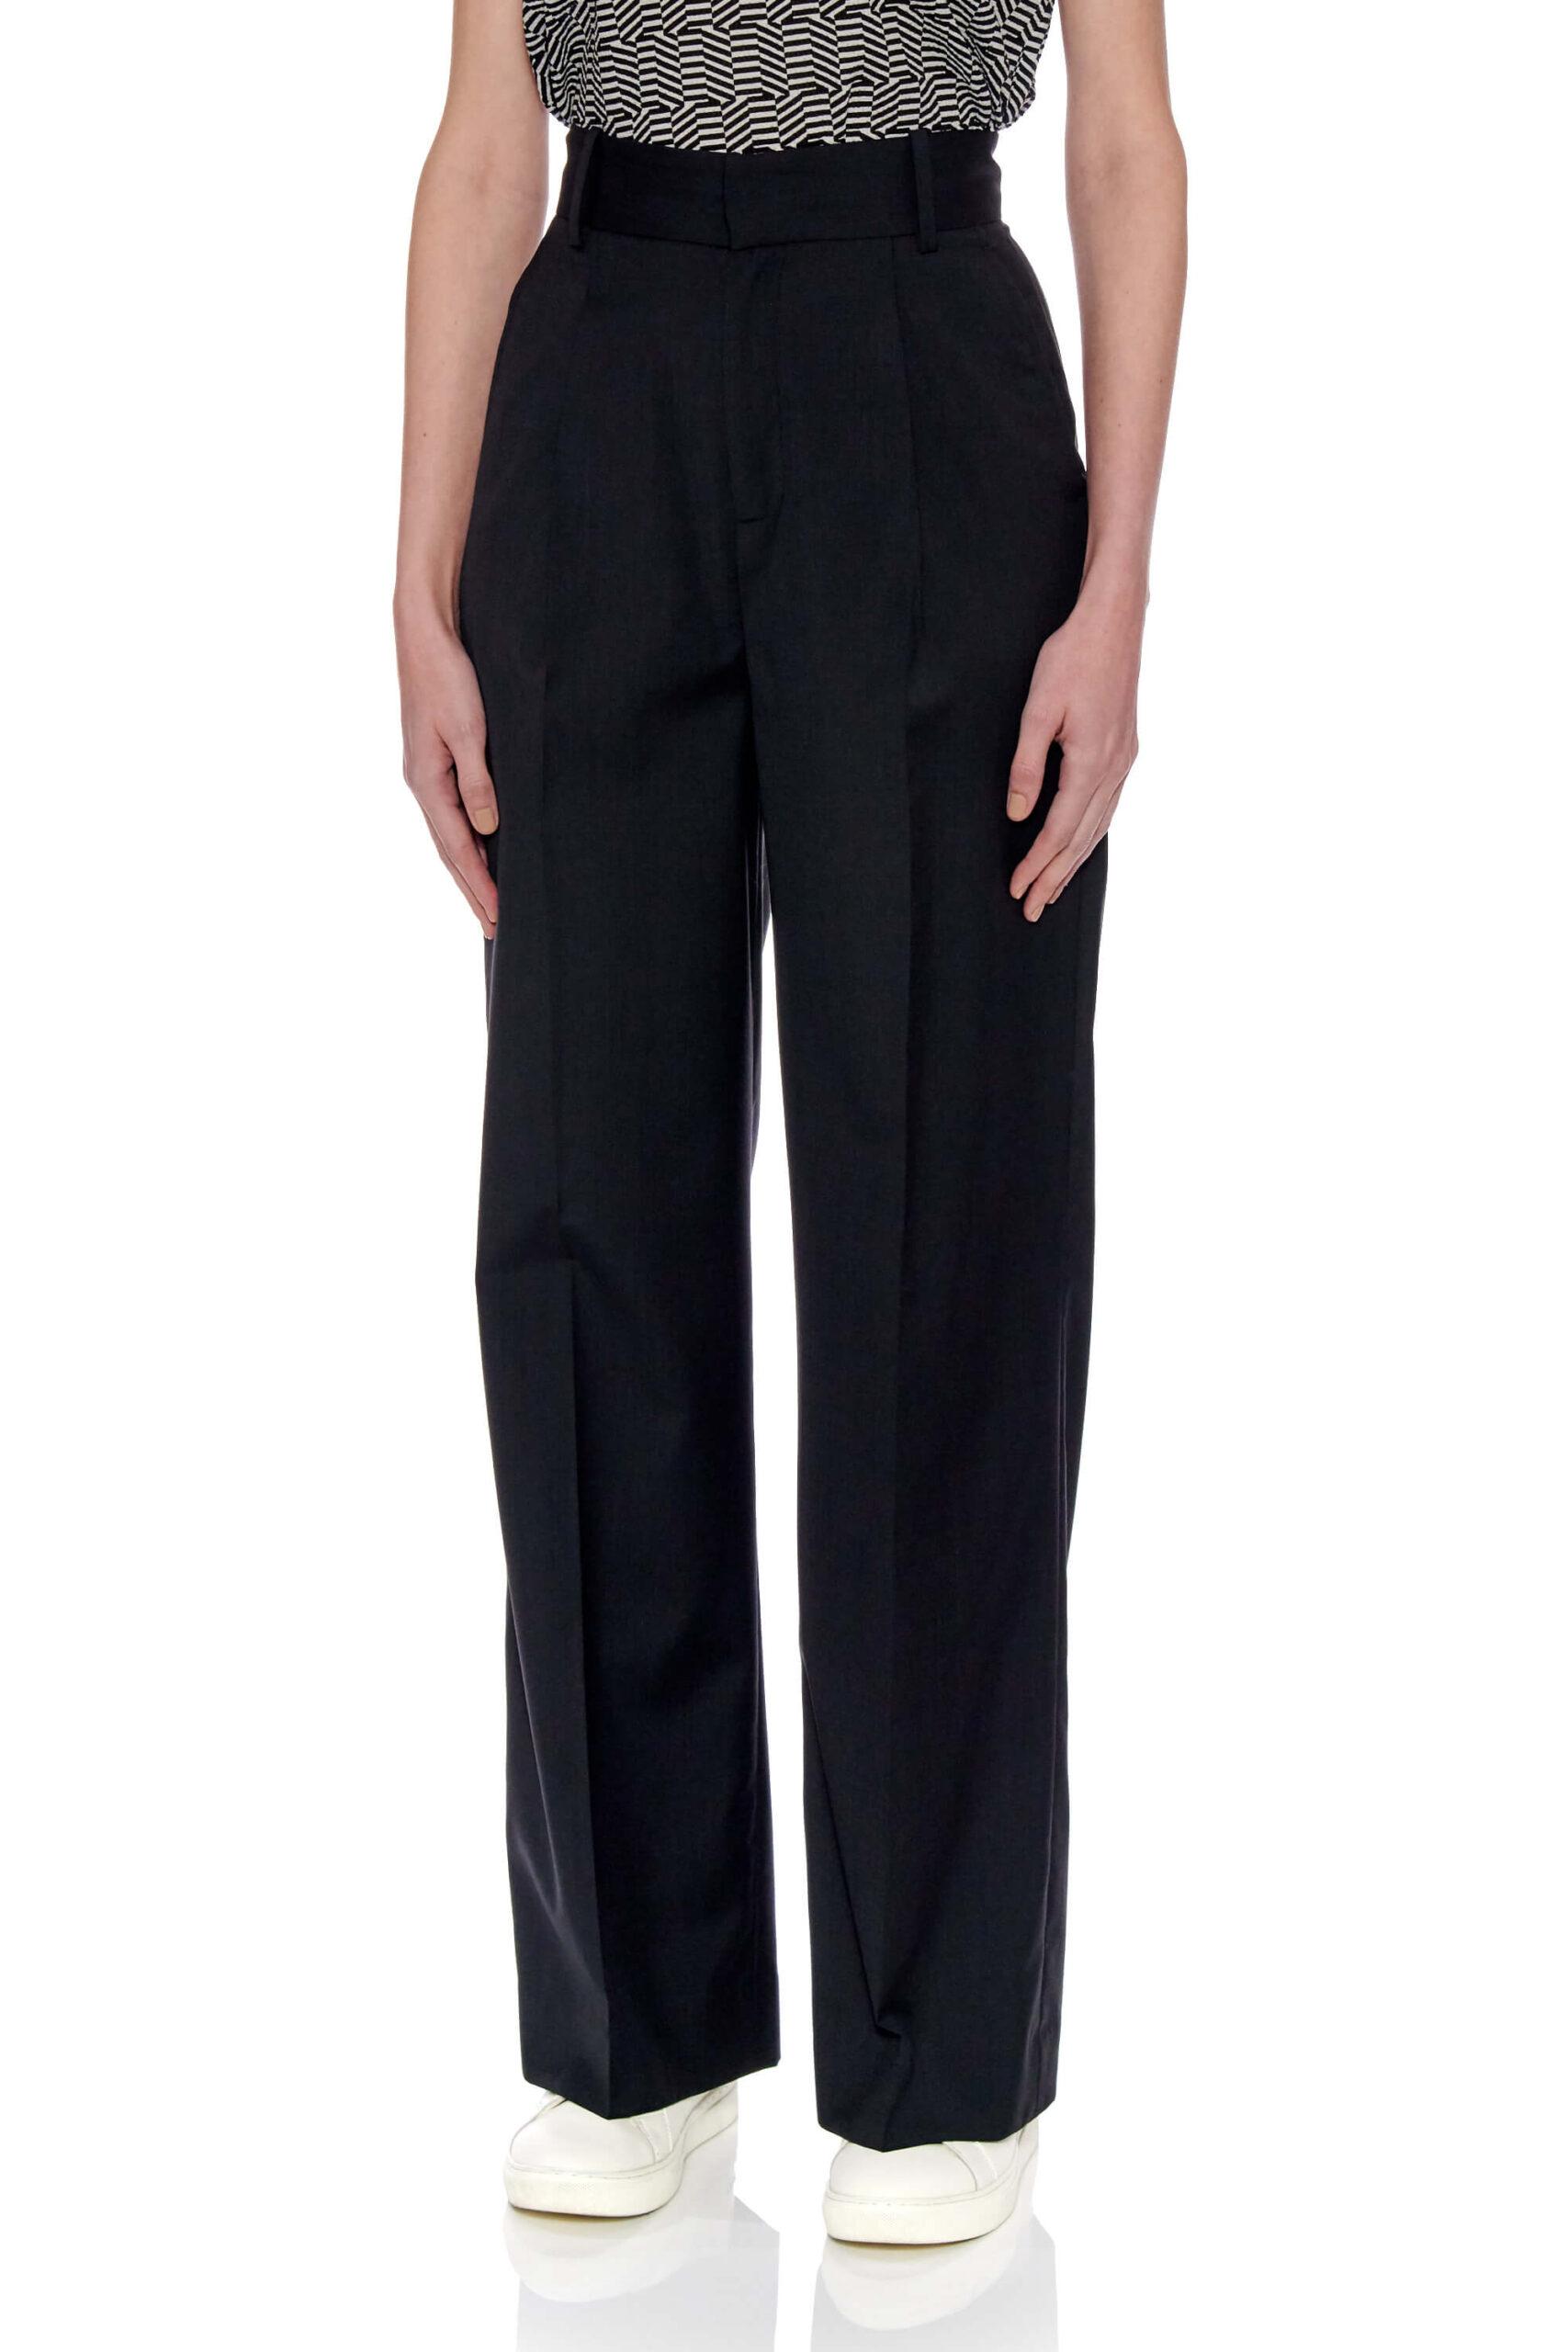 Almeria Trousers – Wide Leg, High Waisted Long Trousers in Black